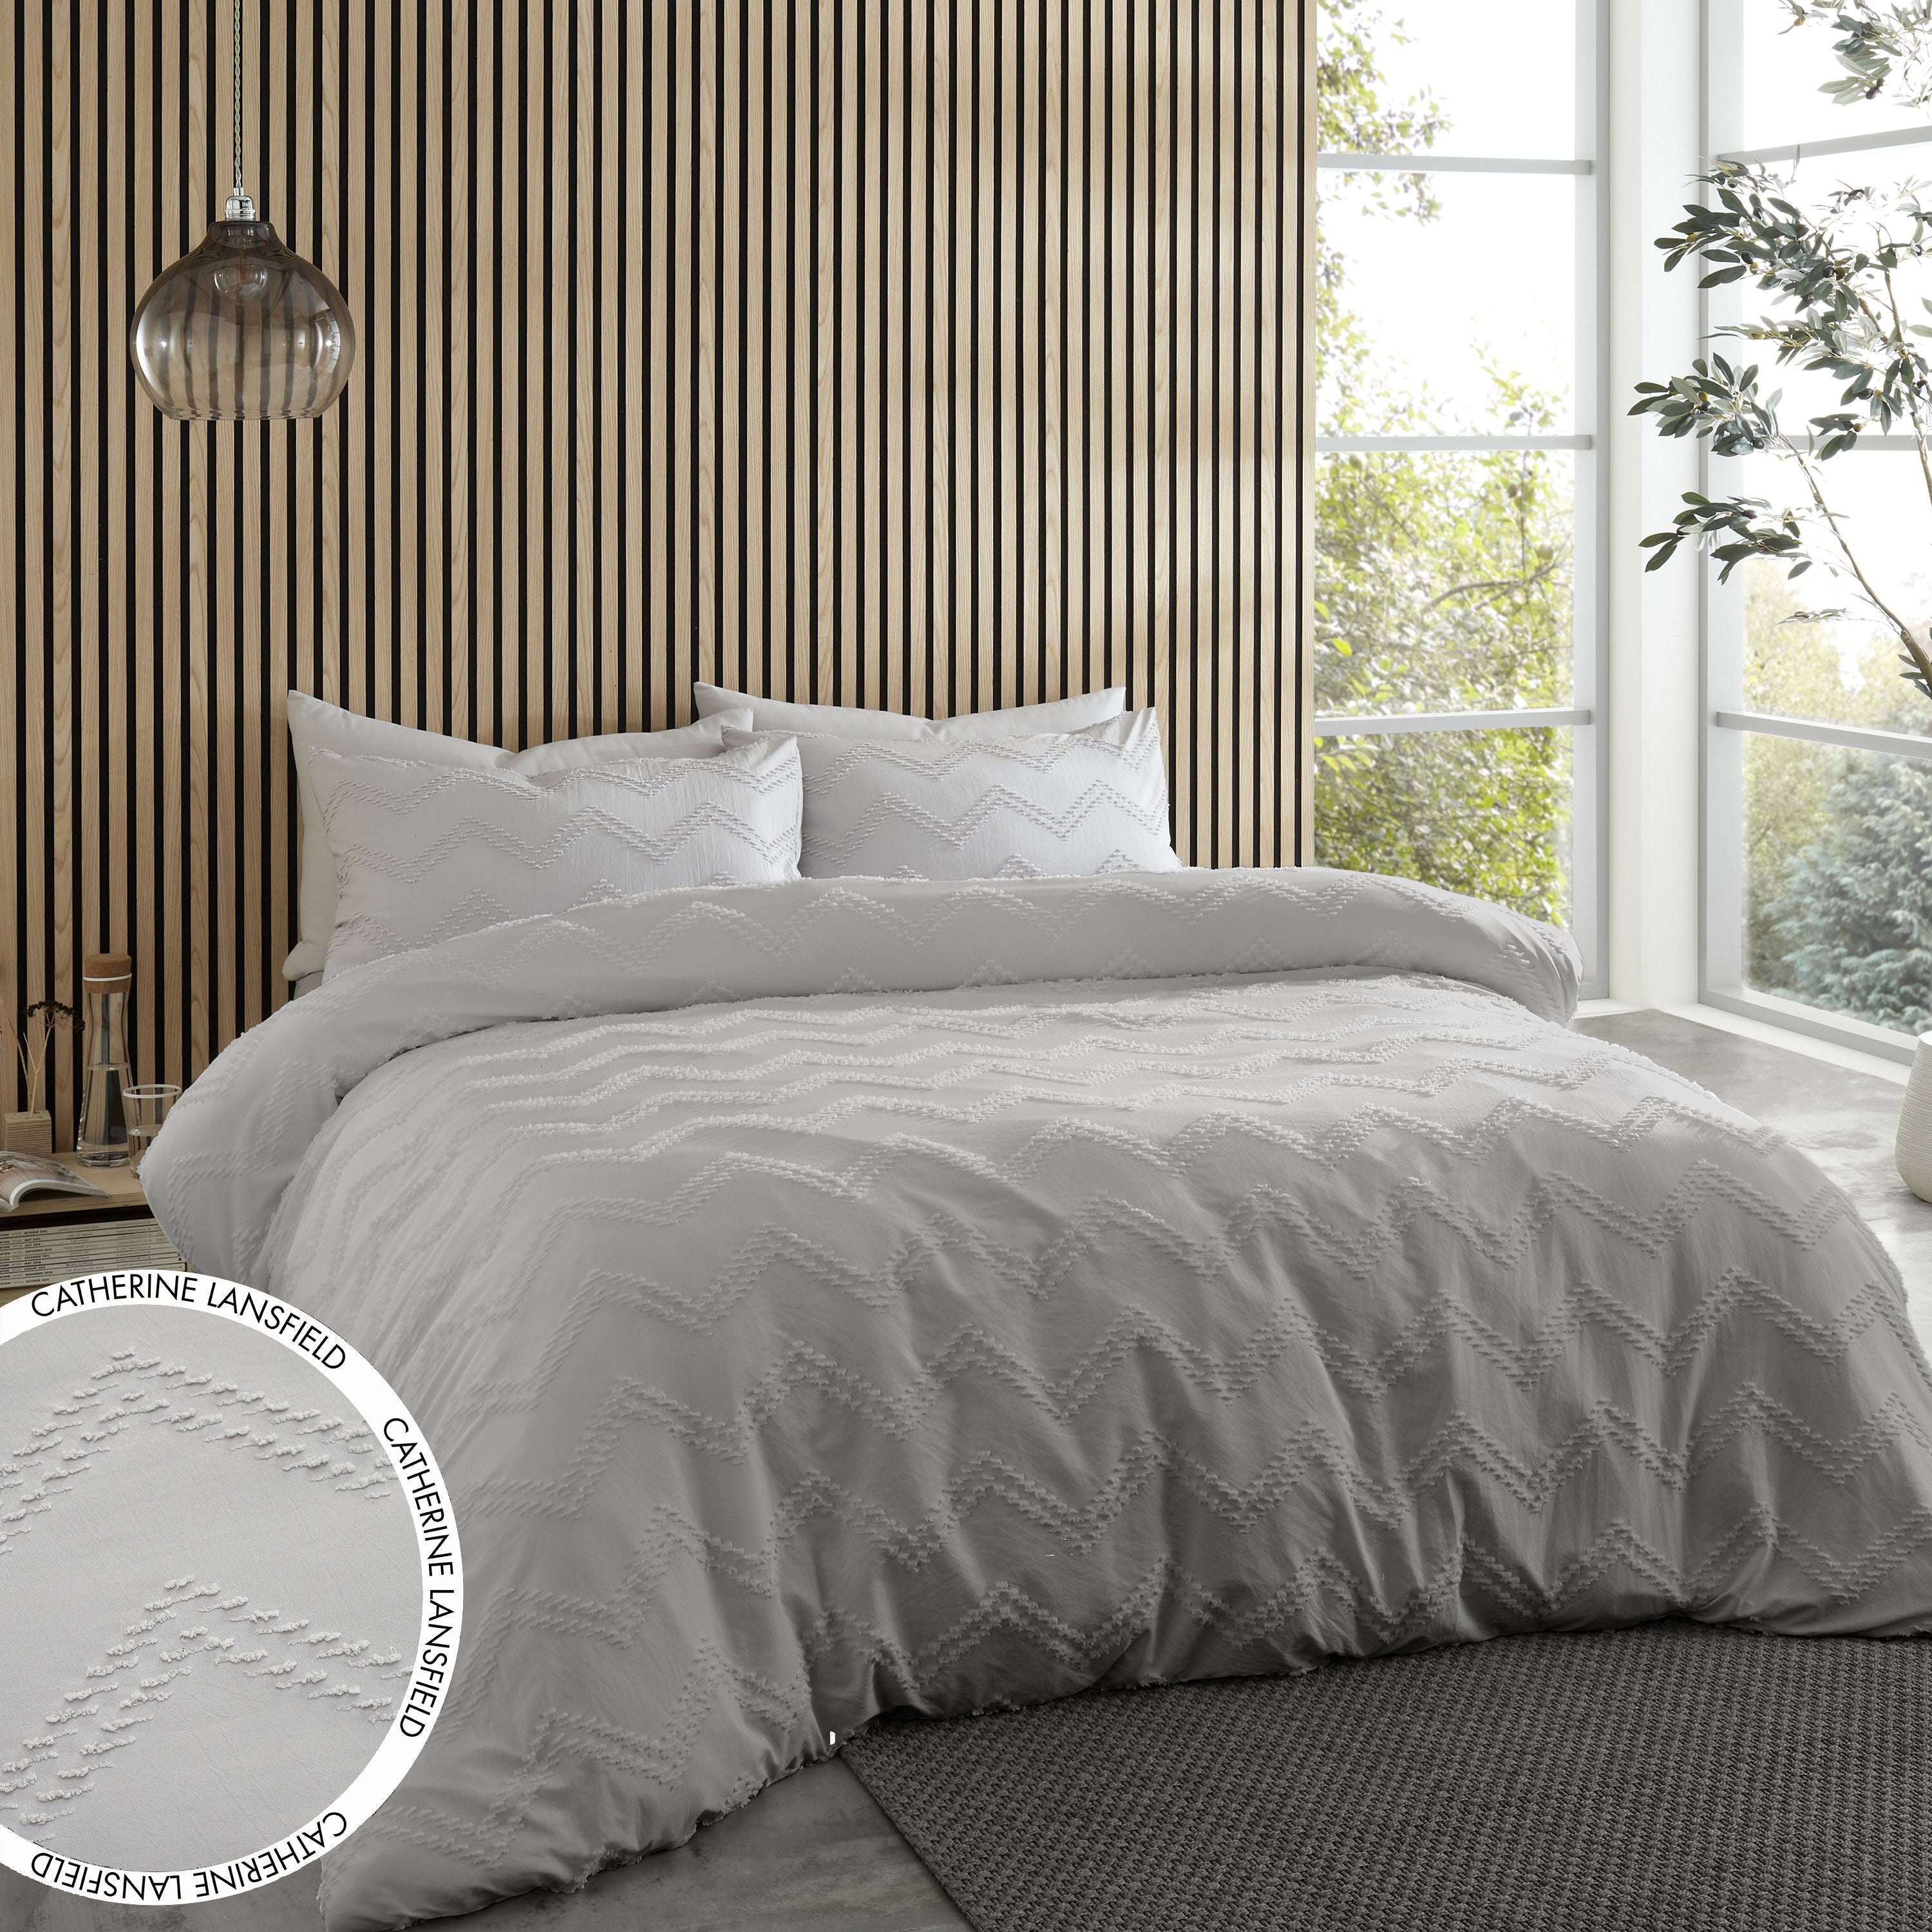 Catherine Lansfield Bedroom Lennon Stripe Quilted 220x220cm Bedspread White  - Quadrant Department Stores : Quadrant Department Stores